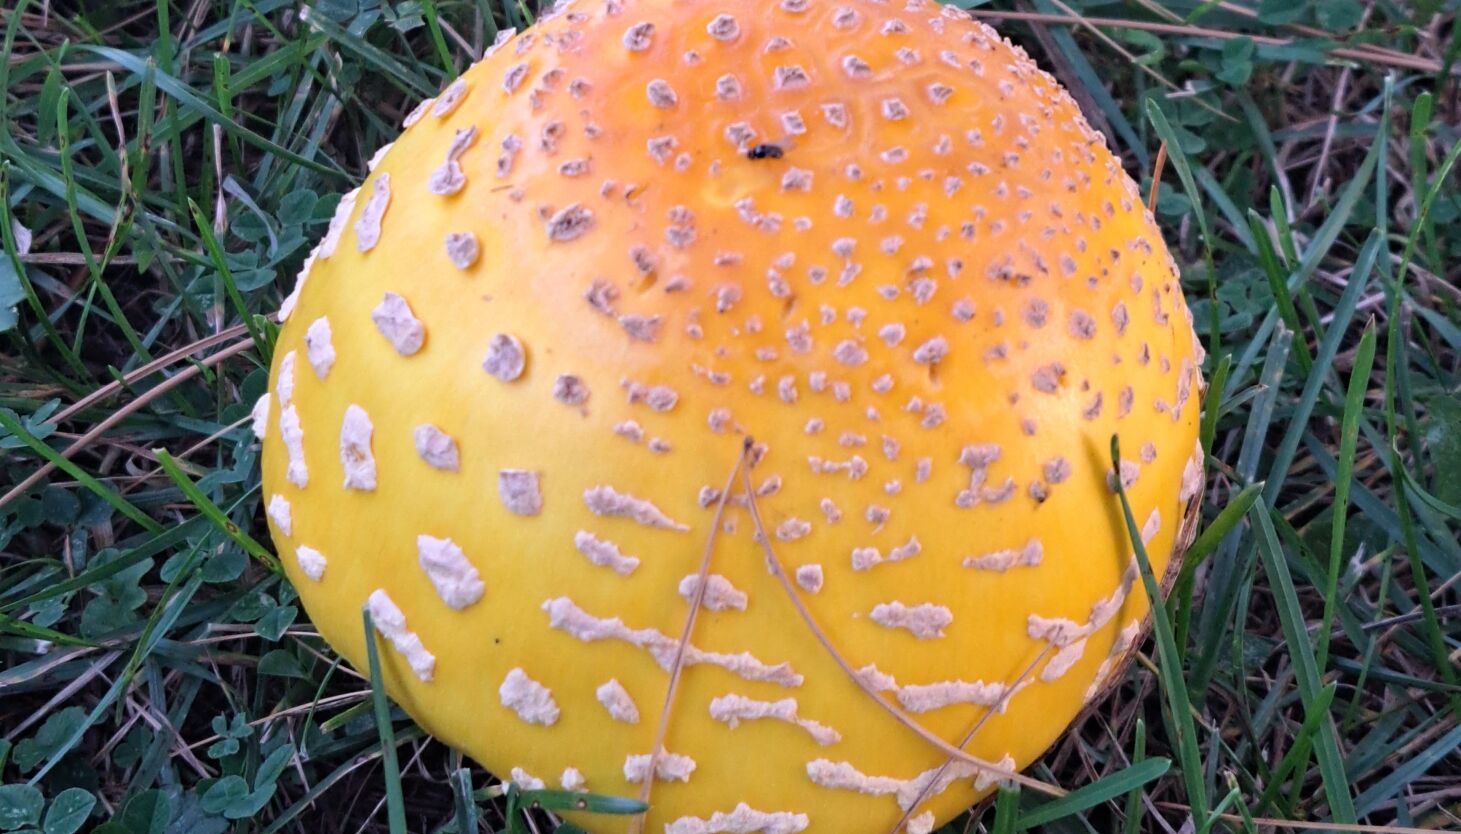 Chicago outdoors: The wonder of nature’s resilency and fly agaric